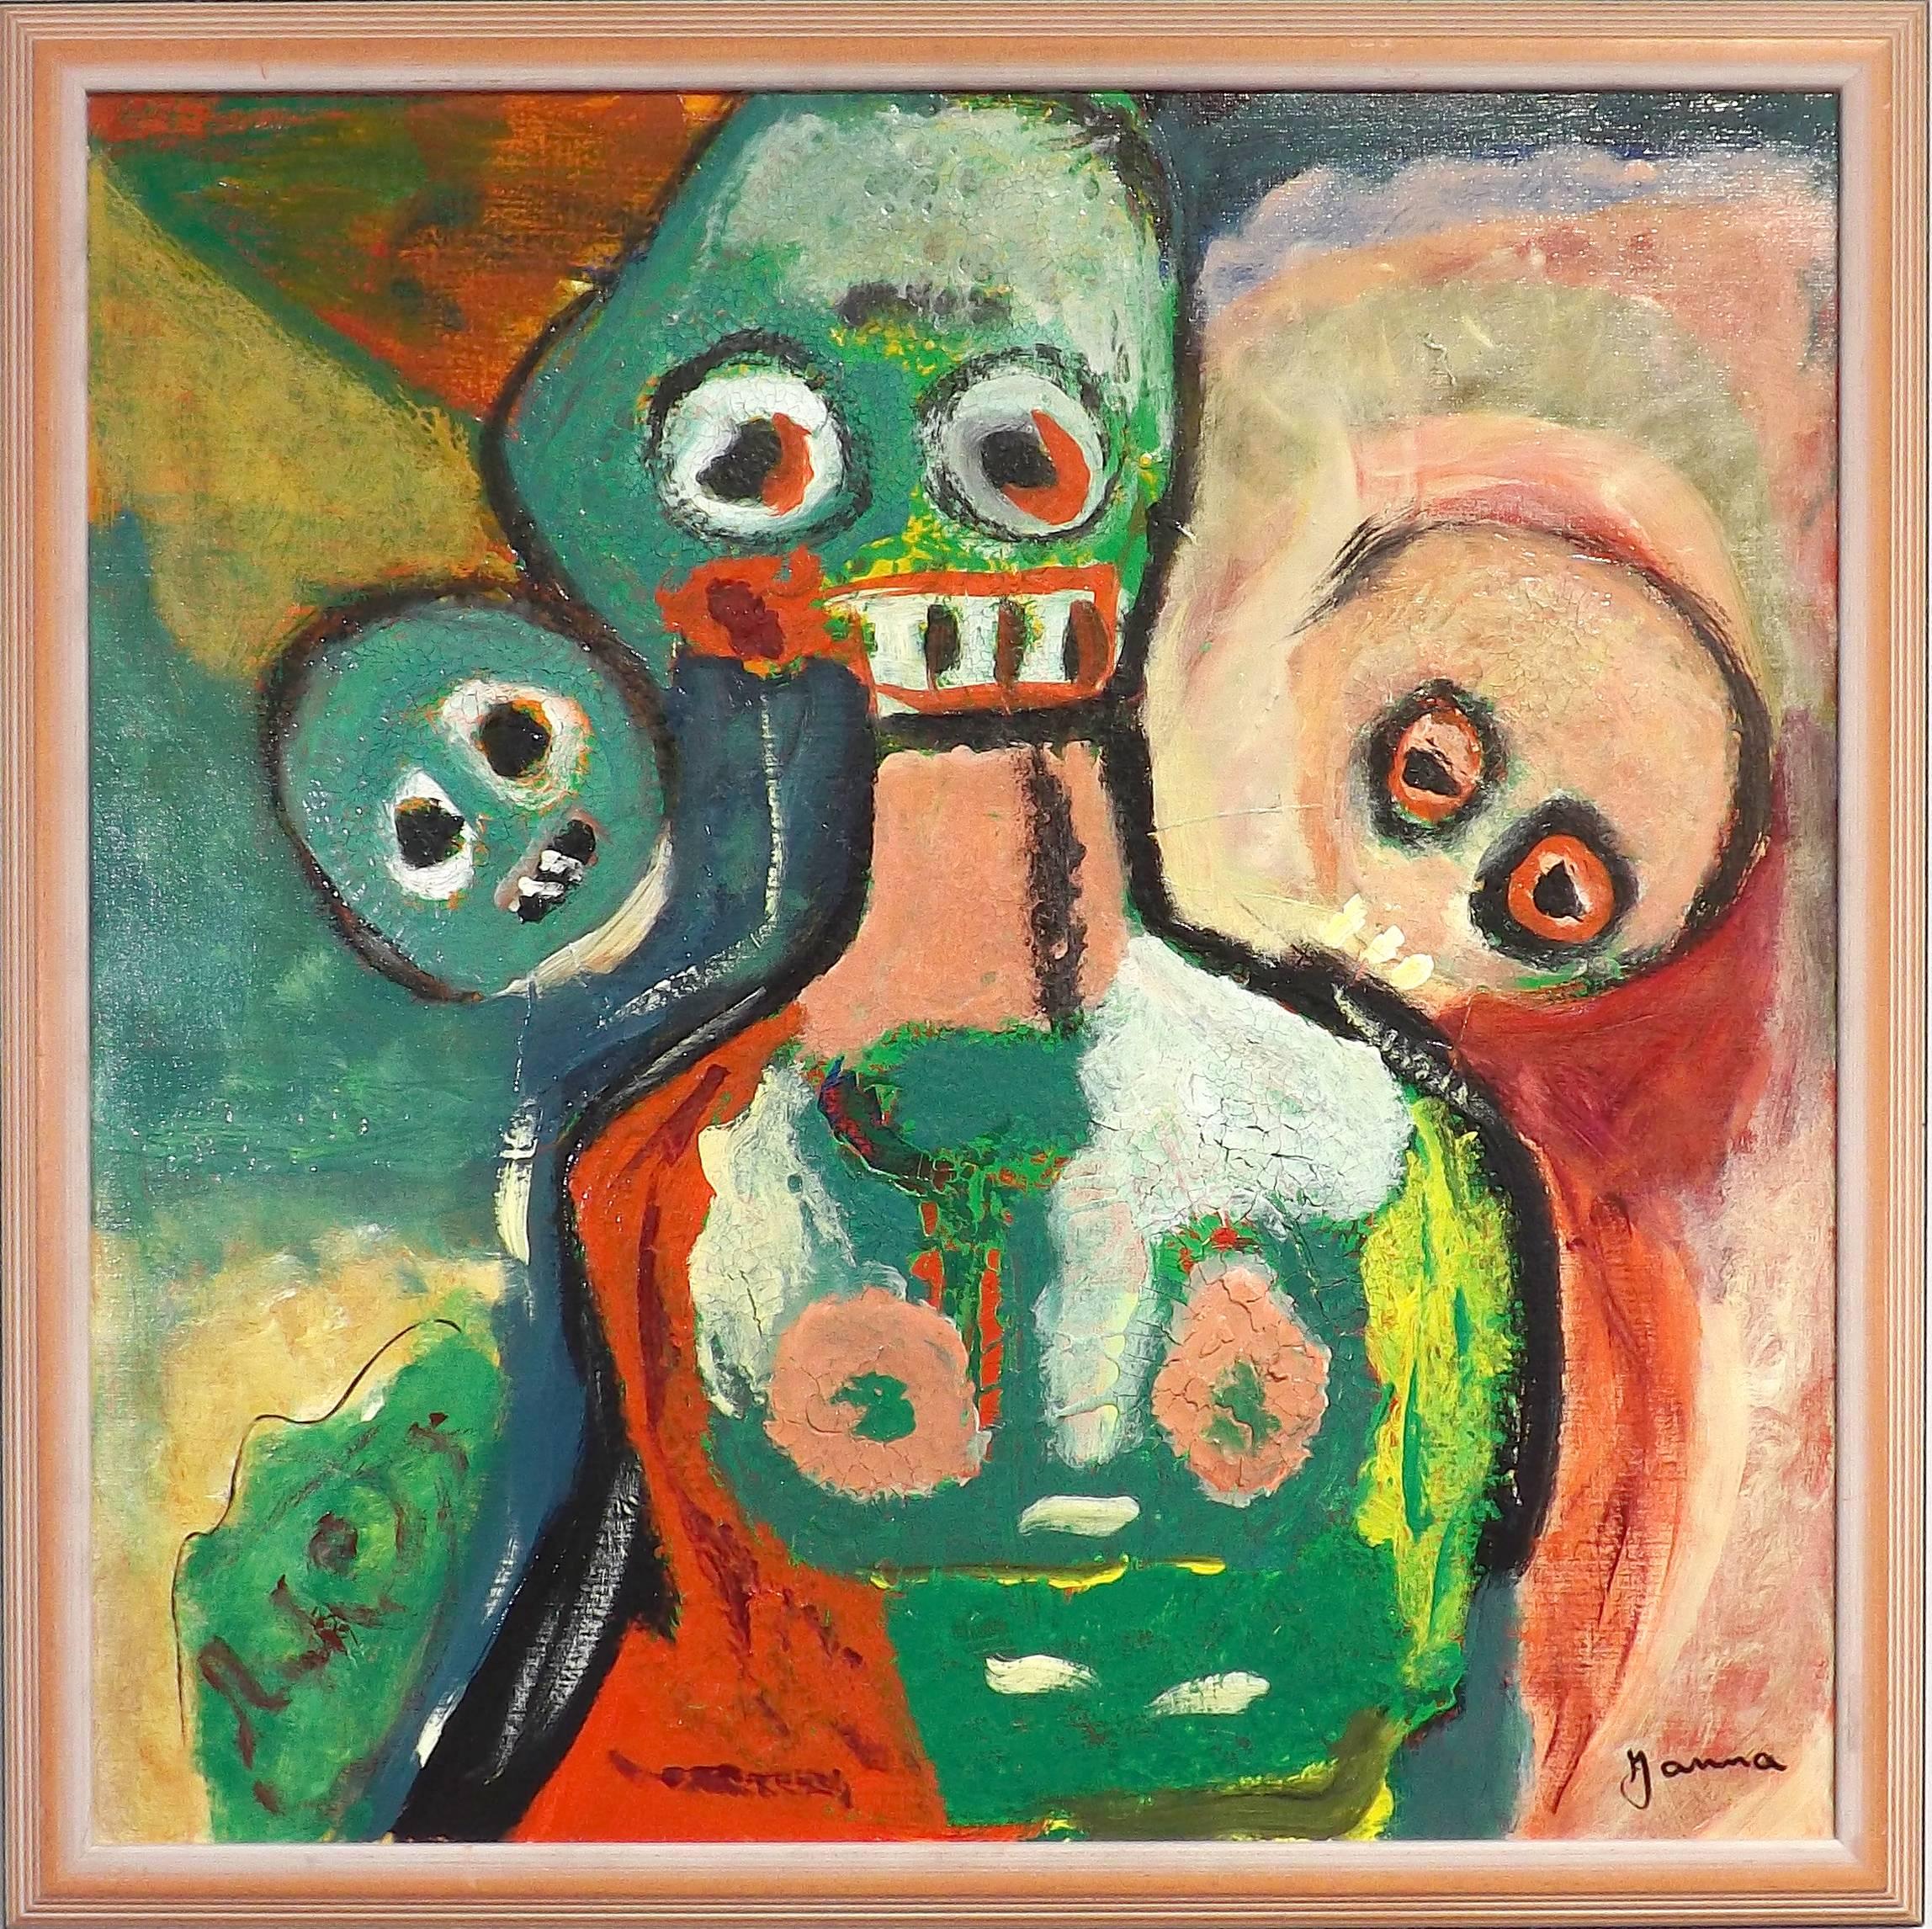 A powerful abstract painting of faces painted by Dutch outsider Janna Straus van de Geest (1930-1999). Janna was born in 1930 and was active in the city of Utrecht in The Netherlands, where she had her studio. She died in 1999.

Signed simple